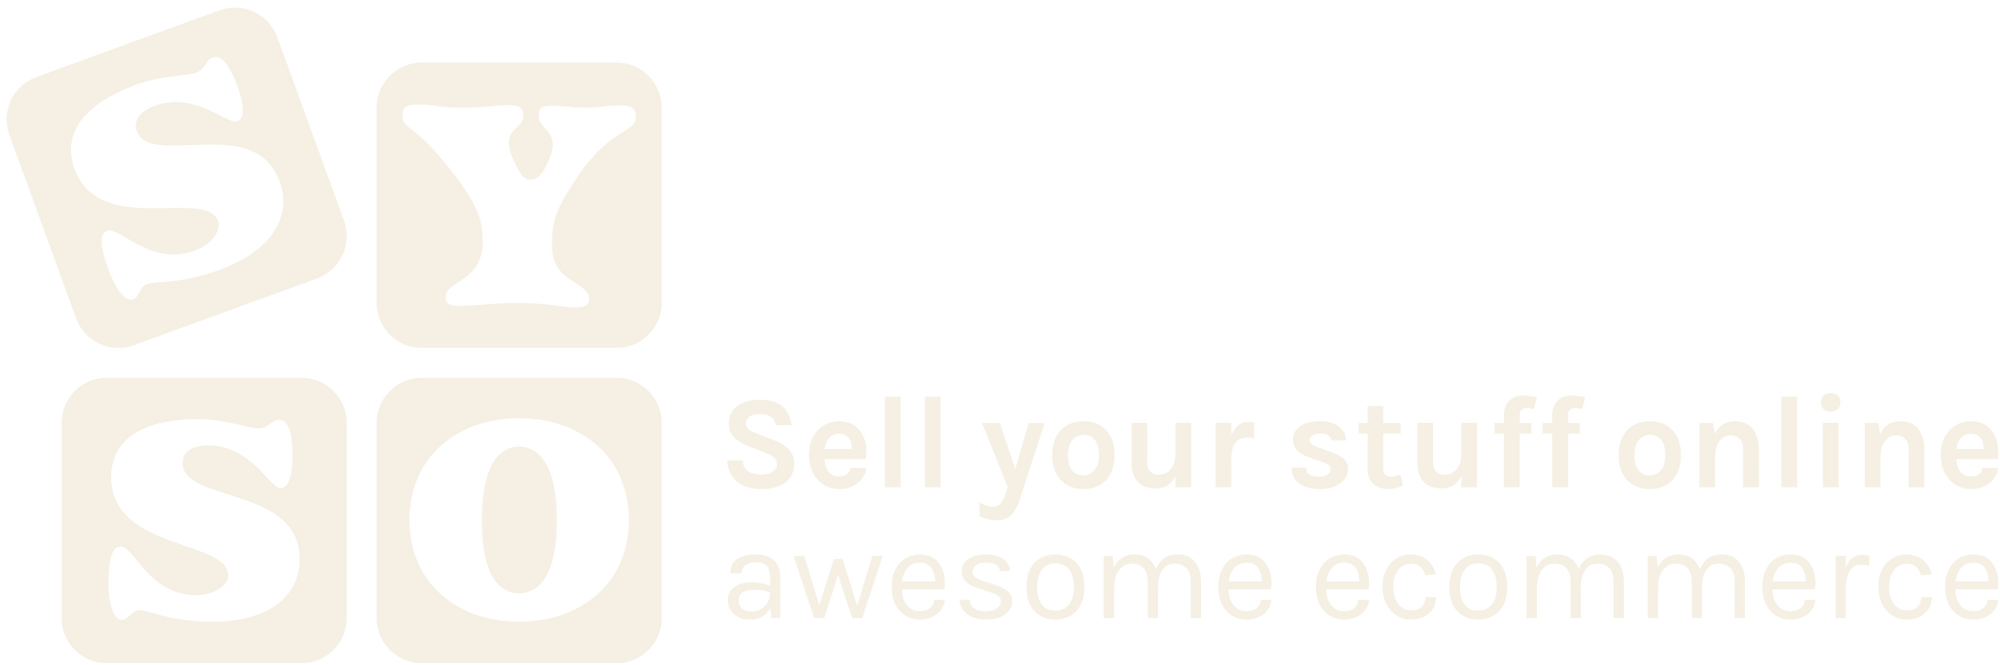 Sell your stuff online - awesome ecommerce